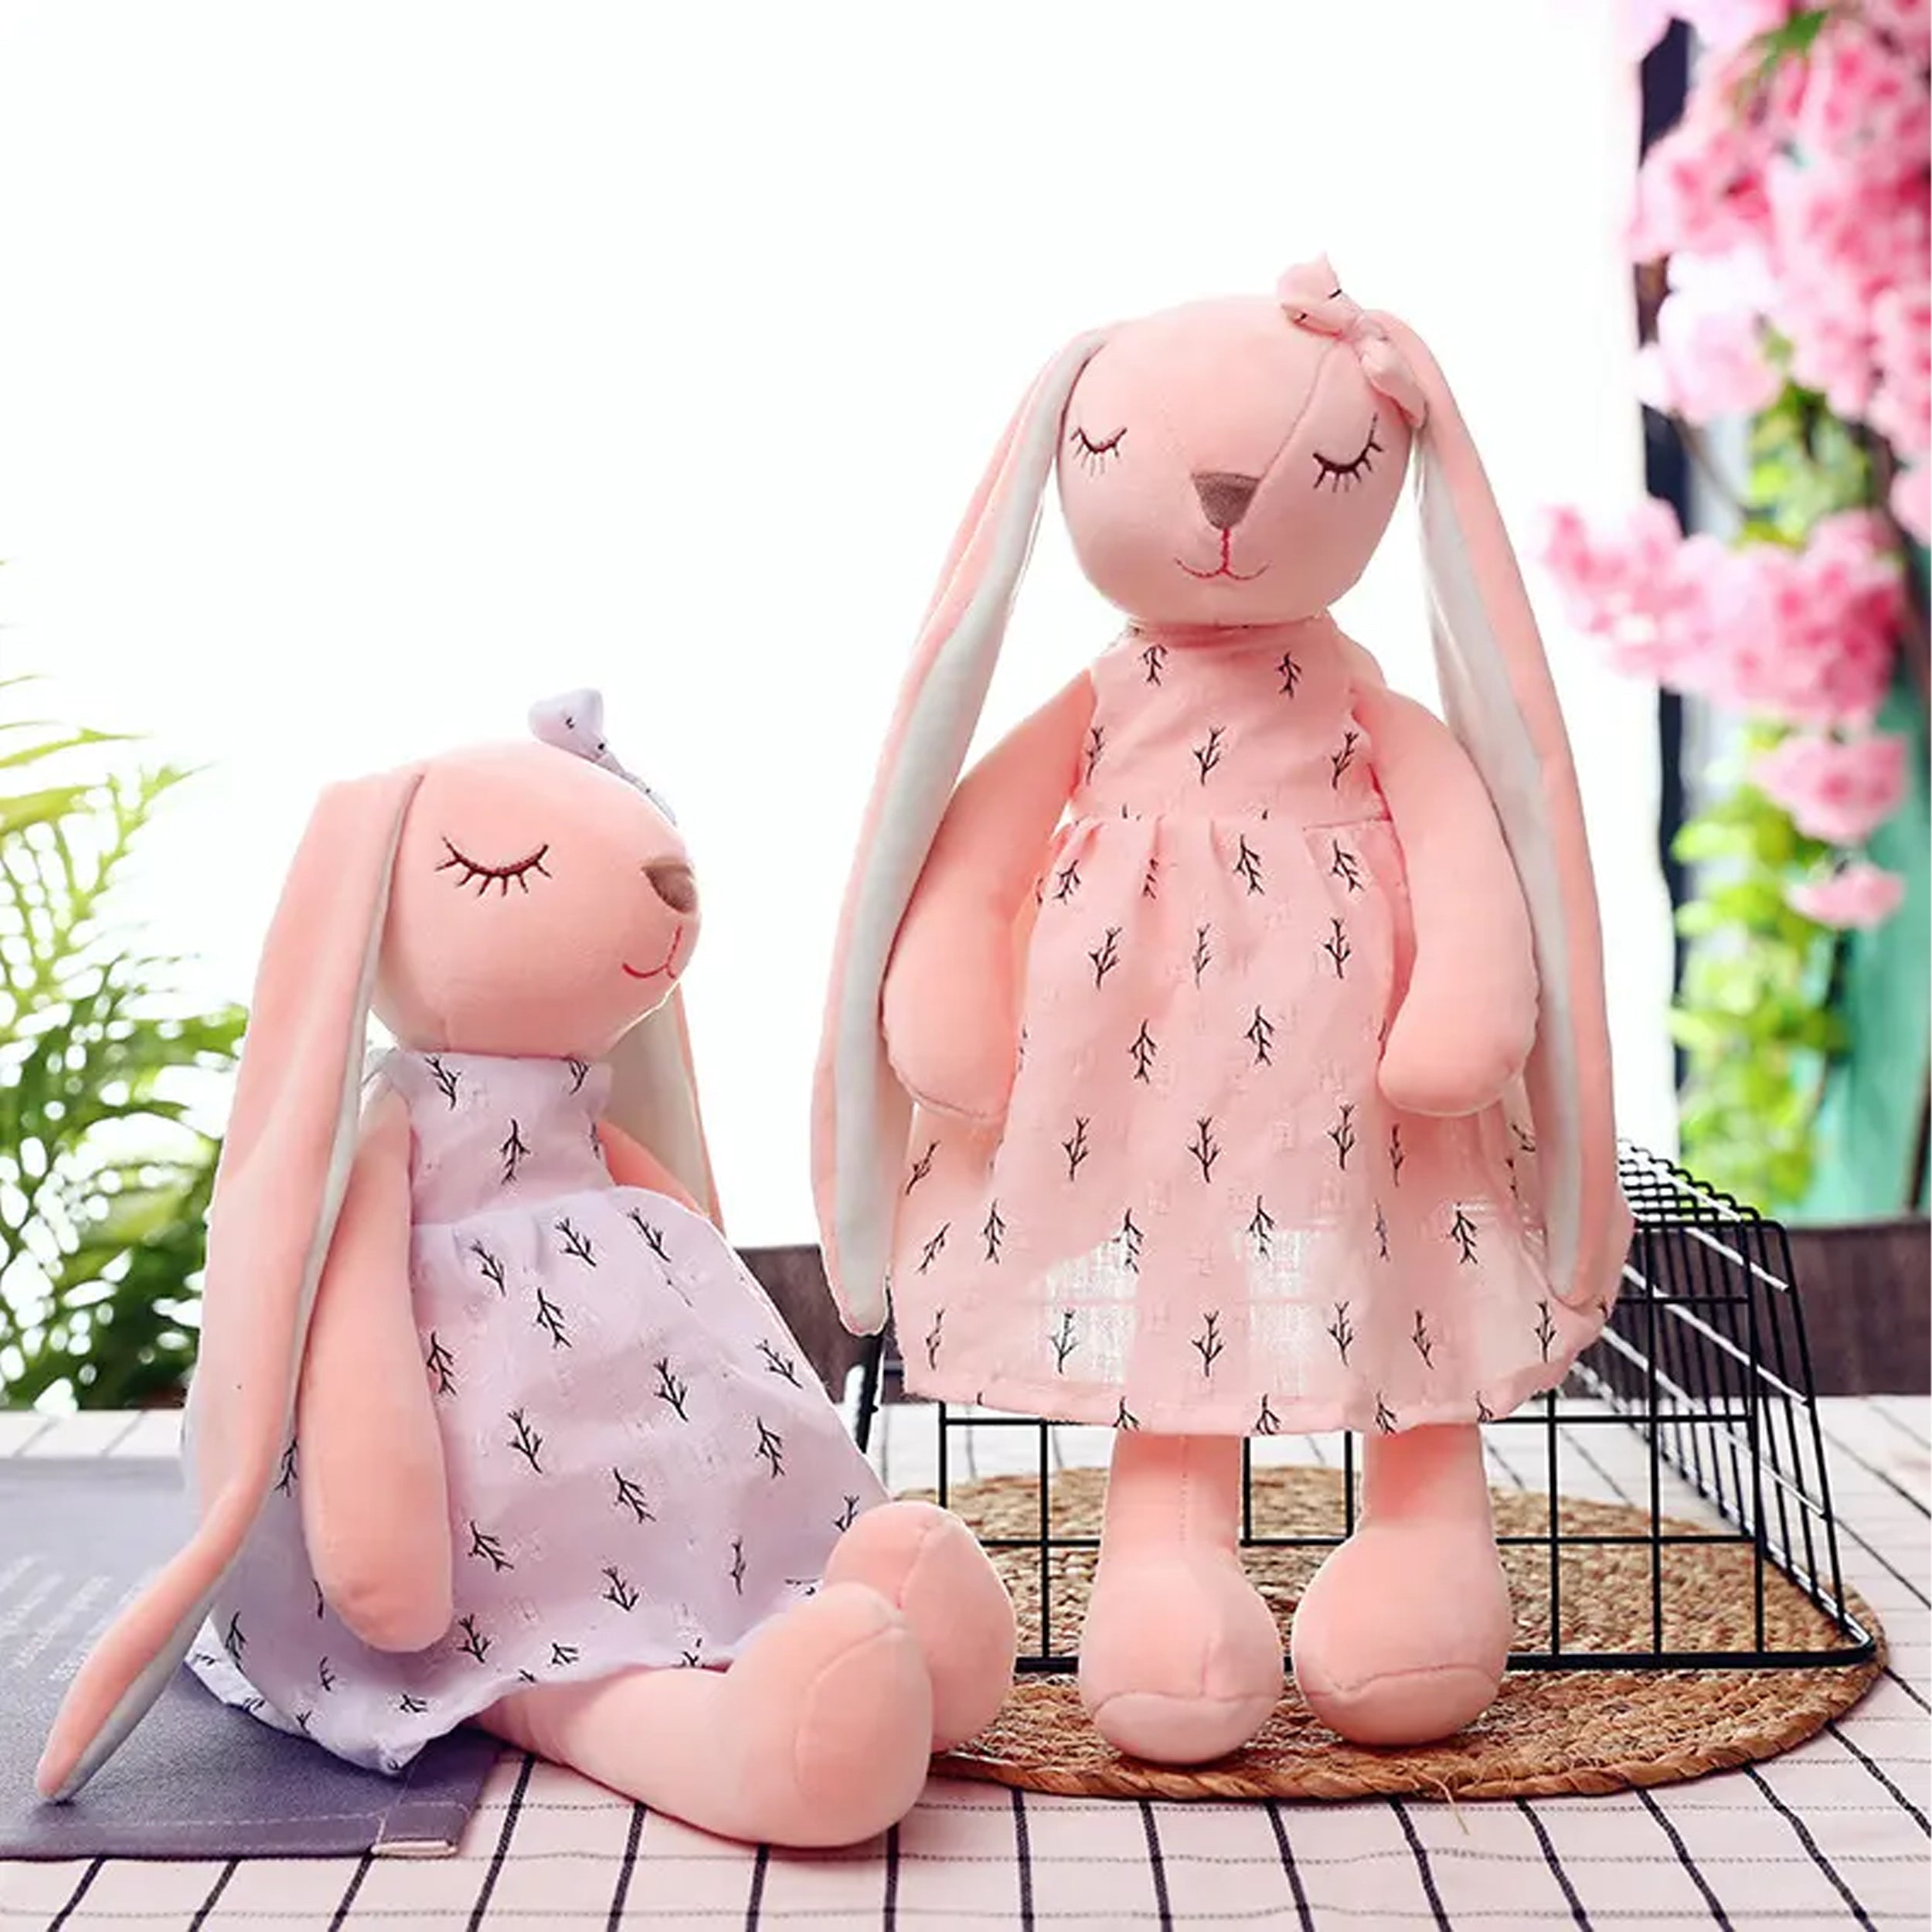 Celebrate Easter with Our Adorable Easter Bunny Plush Animal Long Ears Rabbit Toys